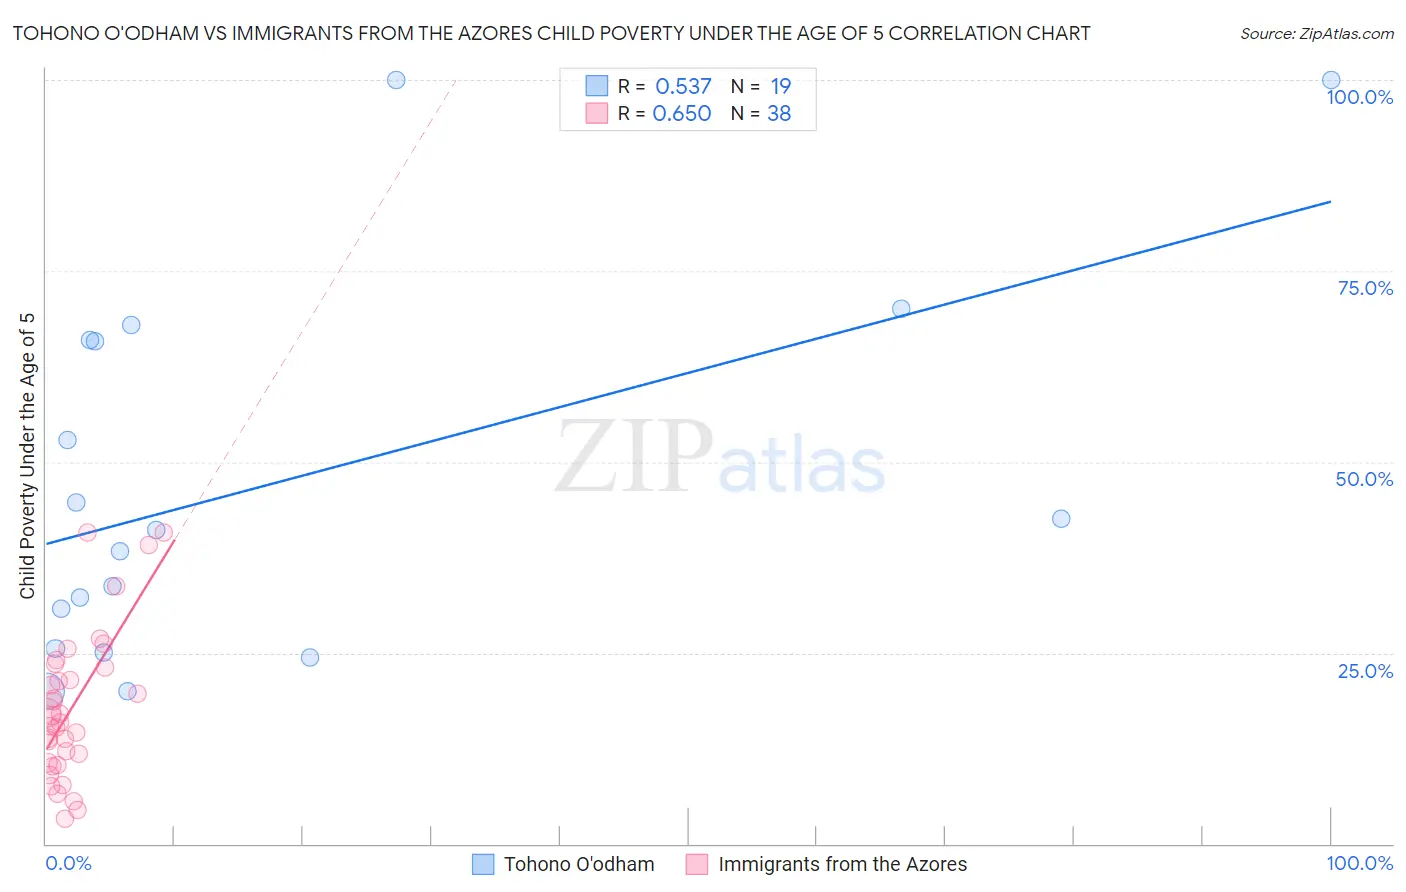 Tohono O'odham vs Immigrants from the Azores Child Poverty Under the Age of 5